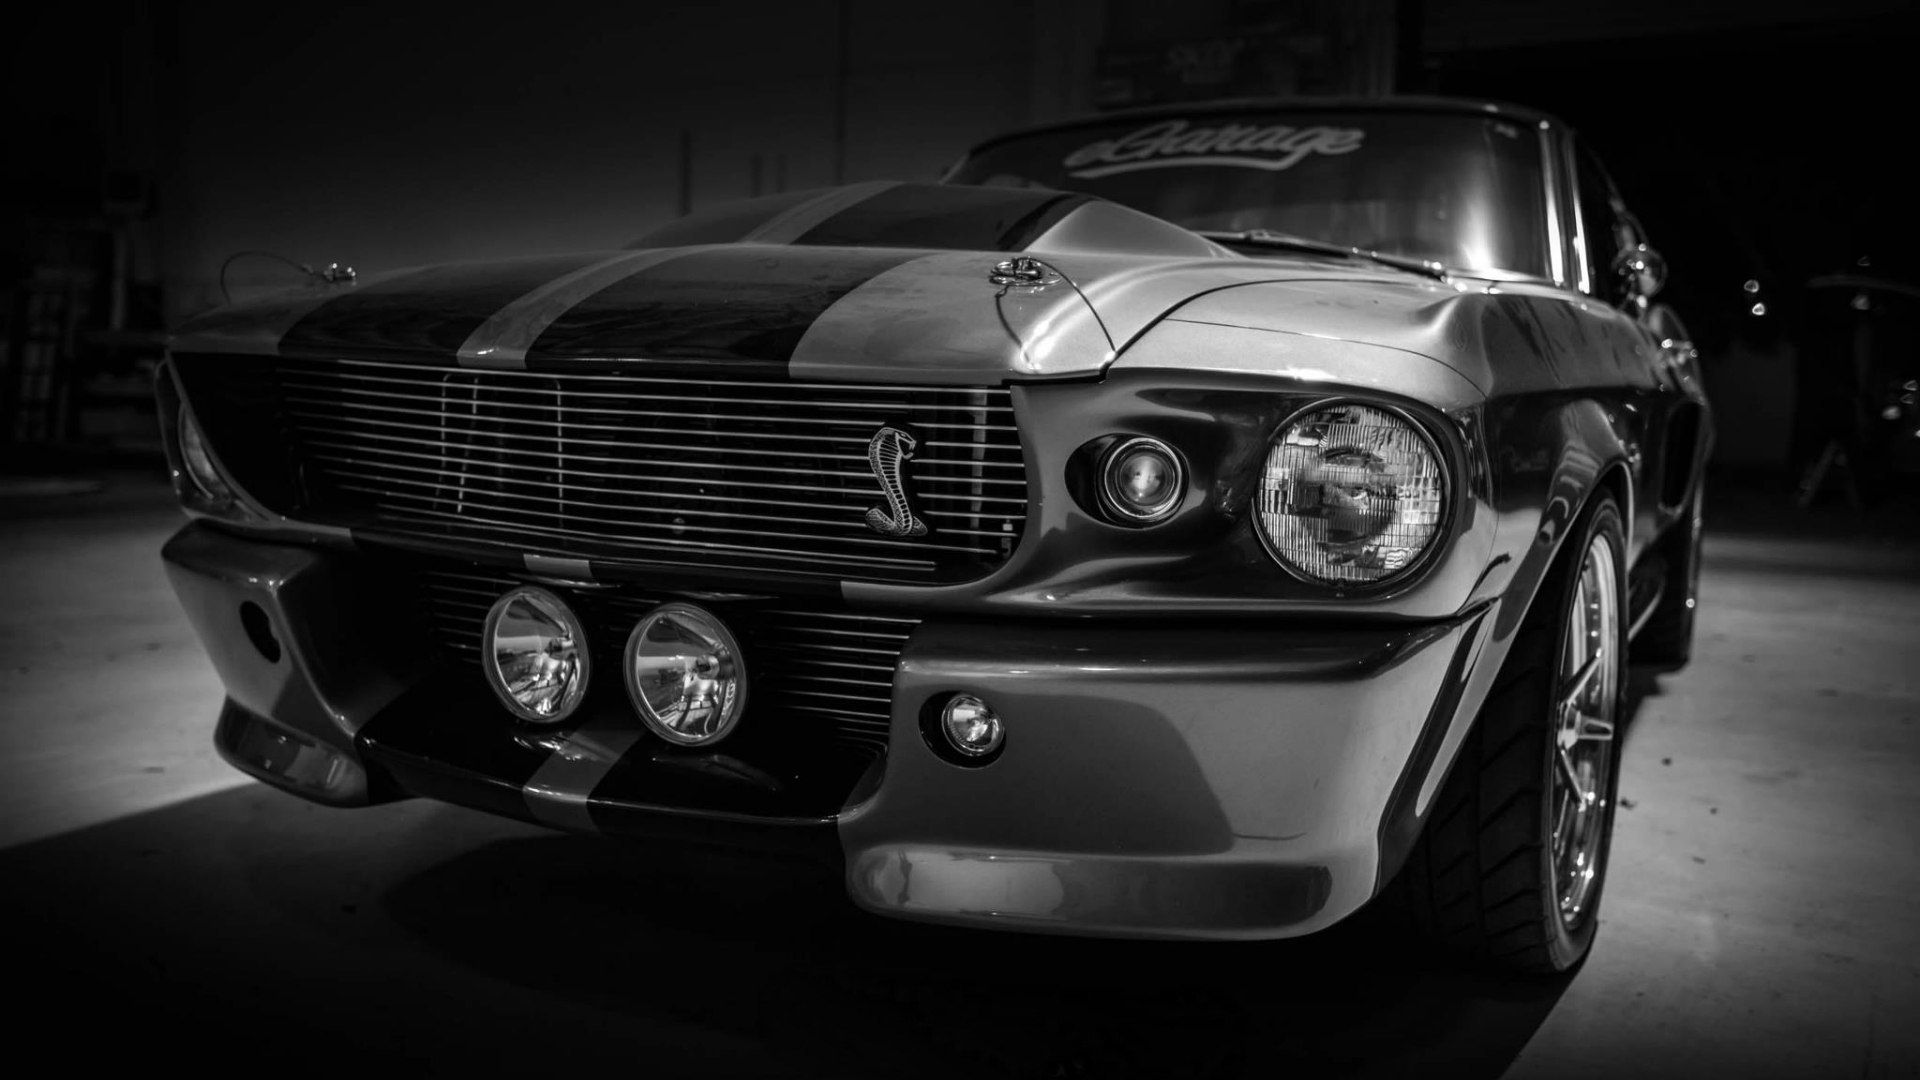 Best Gt500 wallpapers for phone screen